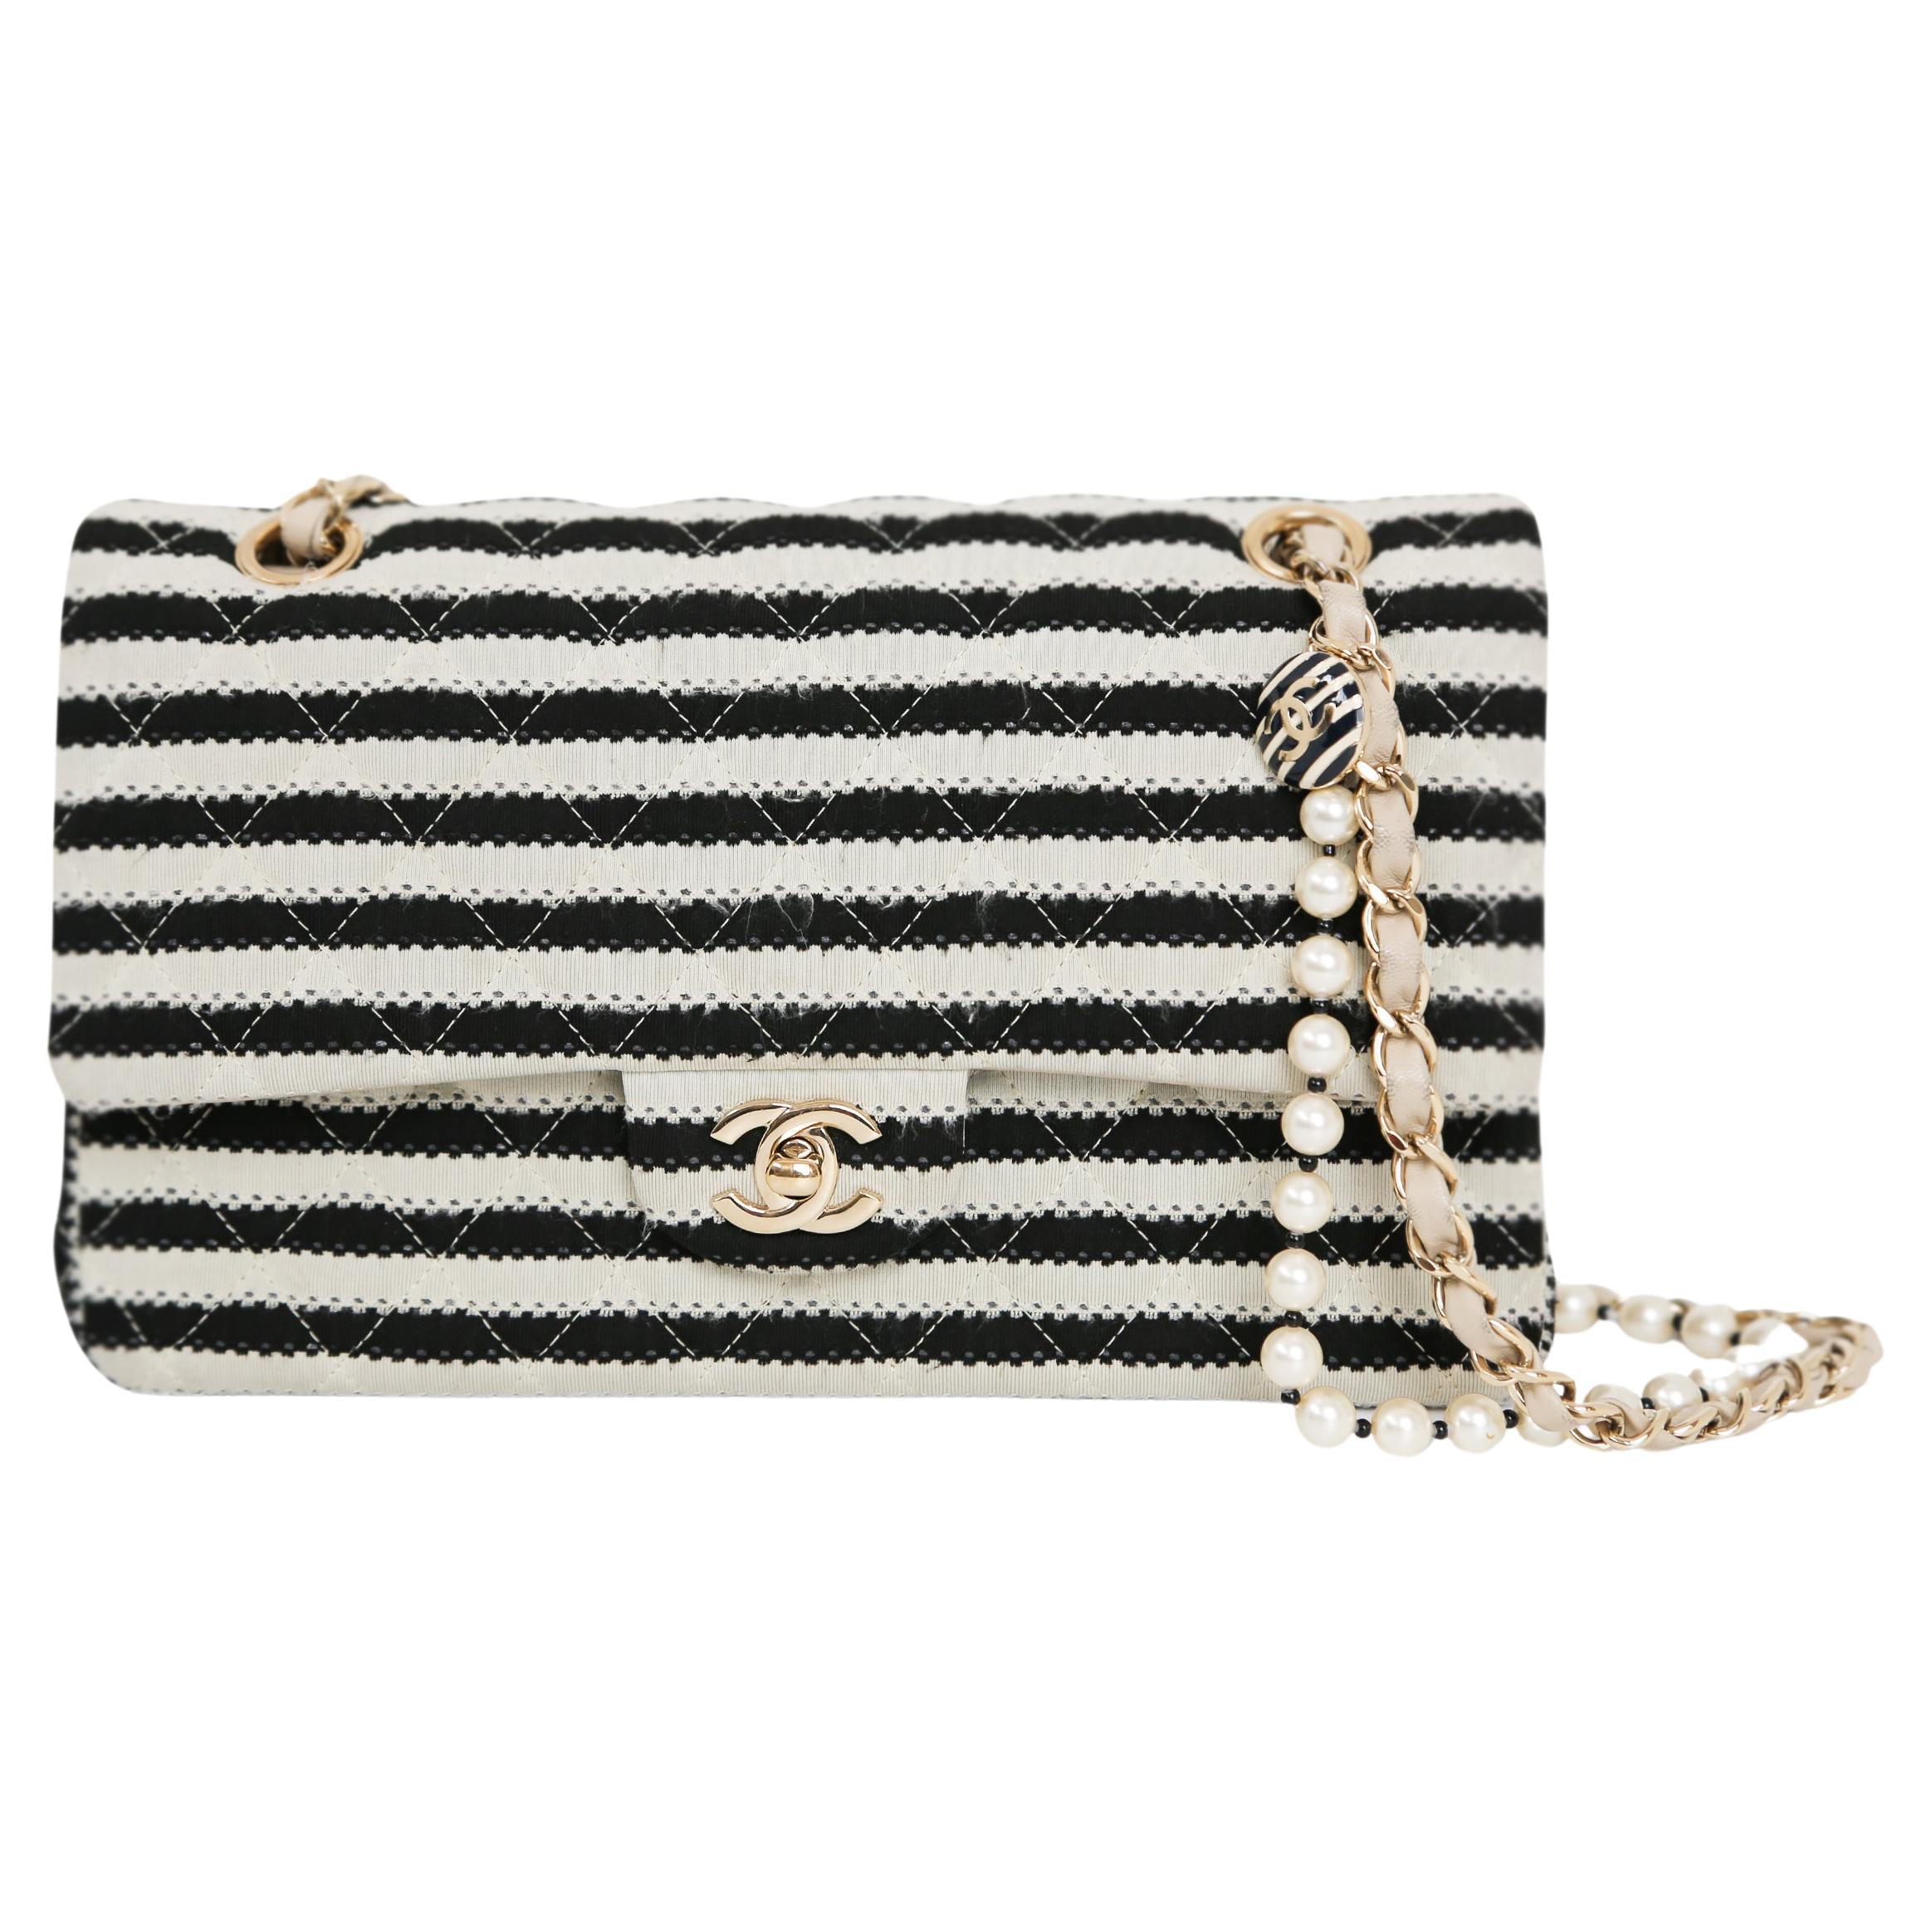 Chanel Coco Sailor Black and Cream Medium Double Flap Bag 2014 For Sale